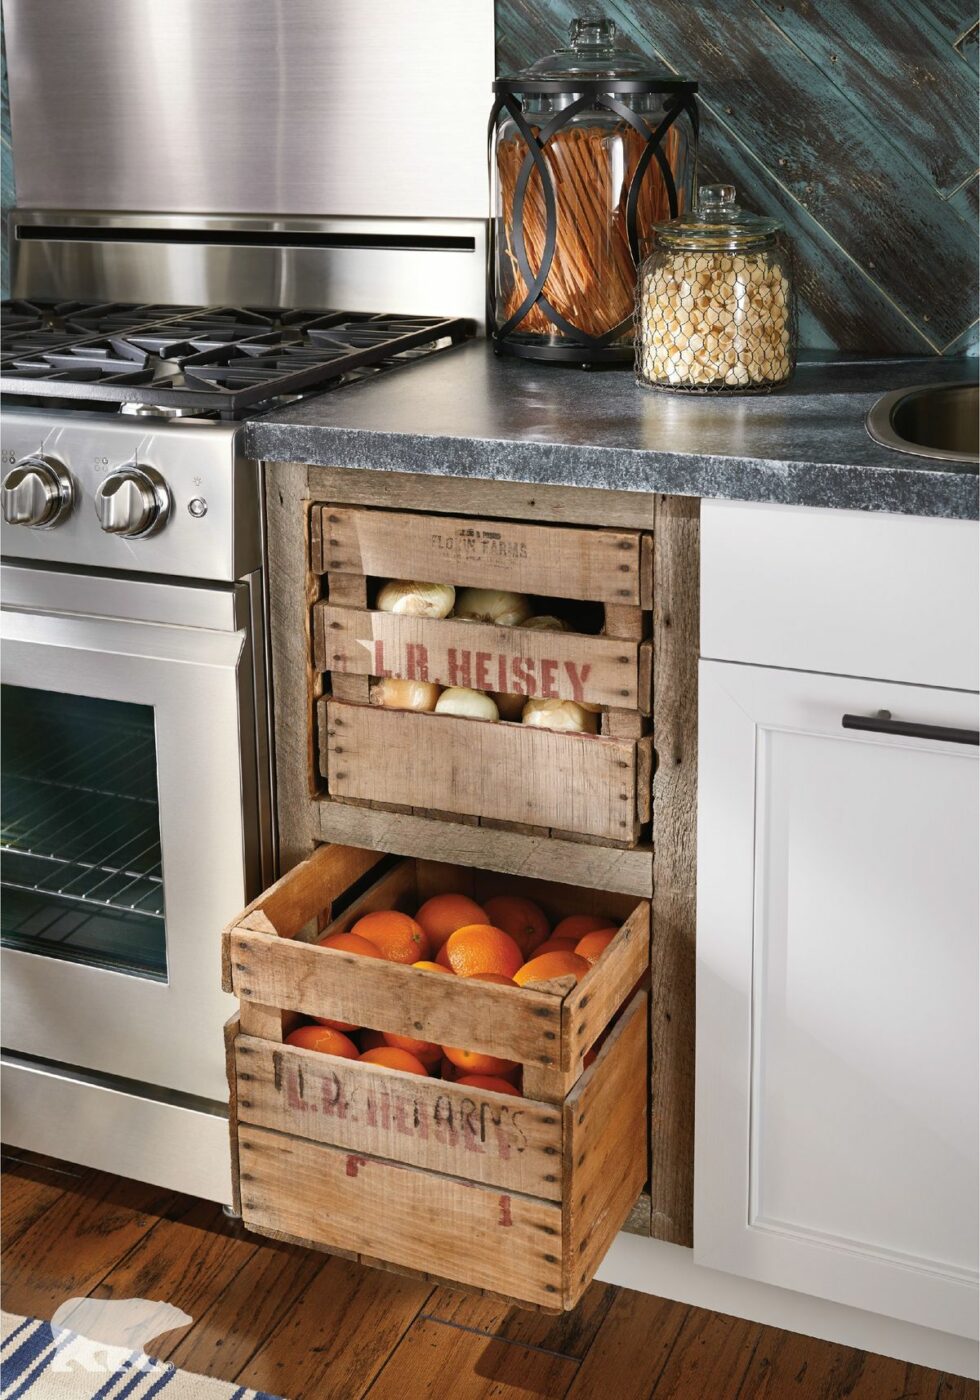 Install Pull-Out Fruit/Vegetable Crates For the Rustic Look